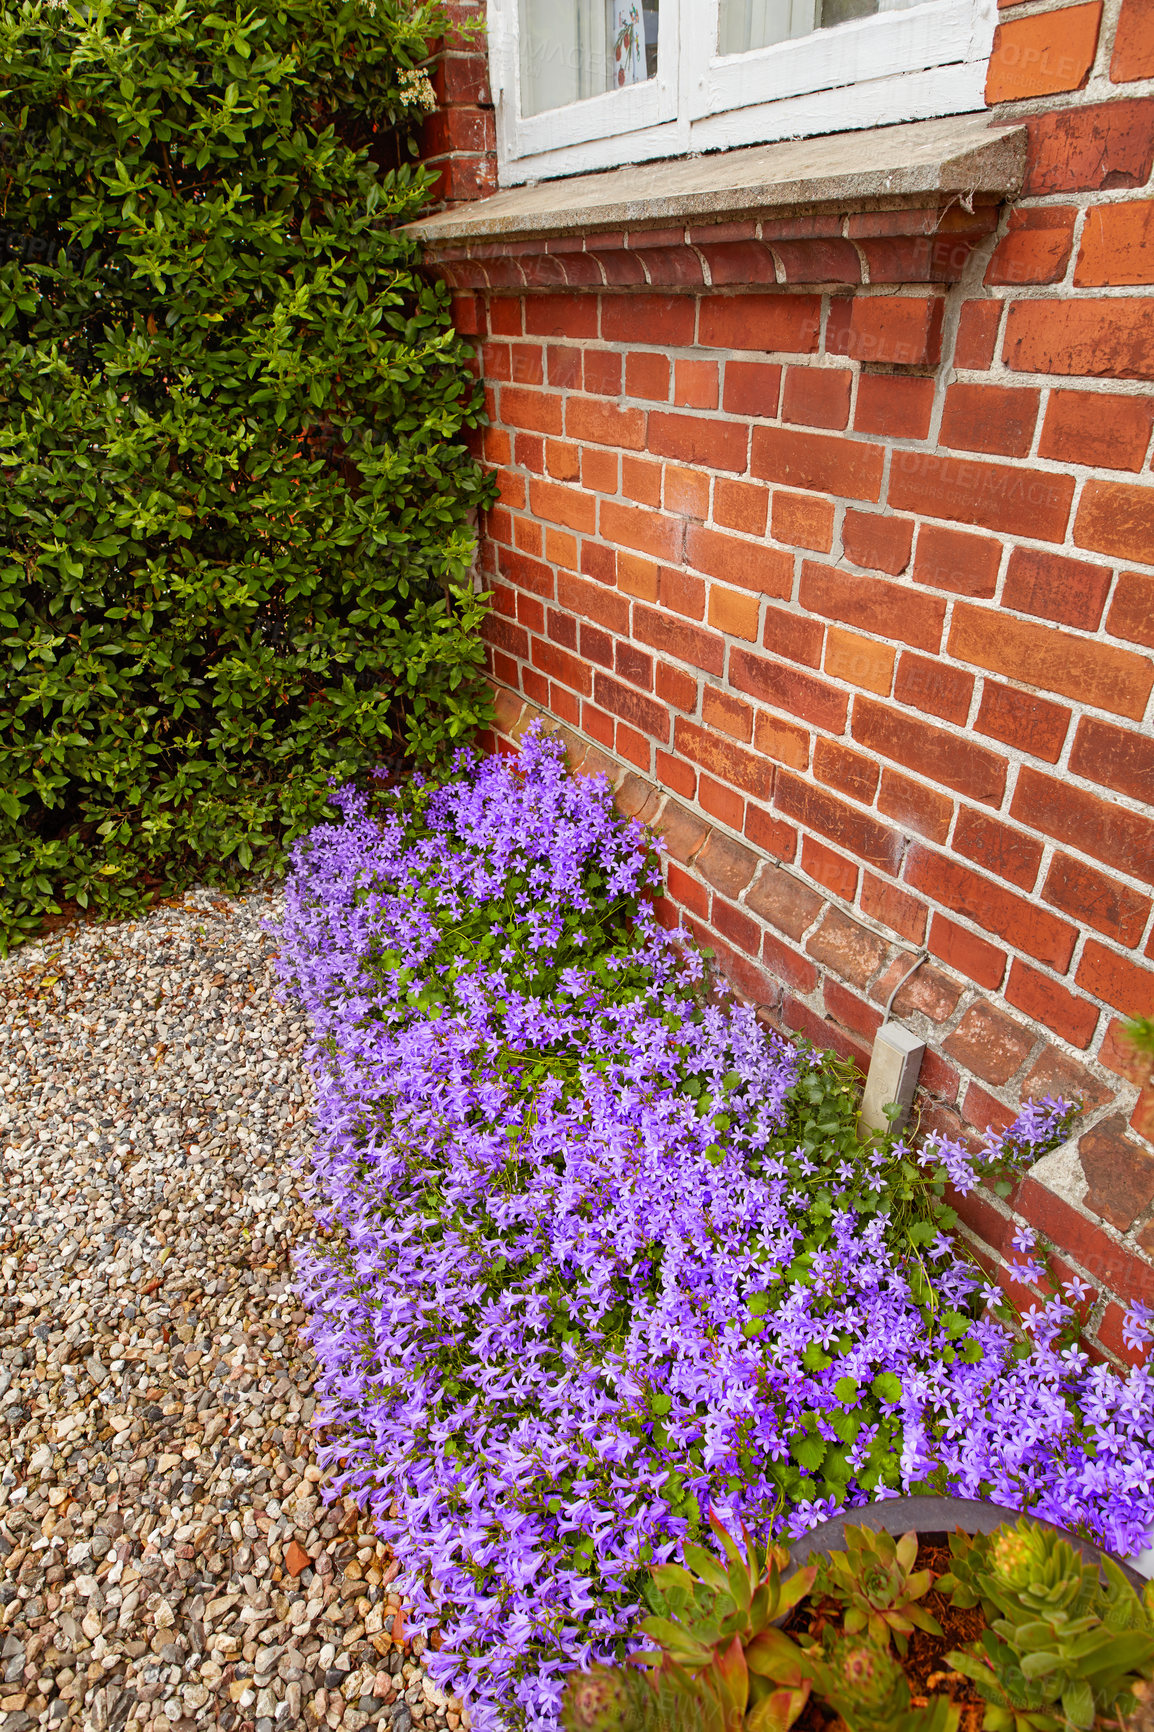 Buy stock photo Perennial purple cranesbill blossoms growing and thriving on the side of a brick house. Colorful ornamental flowers blooming in a neat and well maintained backyard garden. Beautiful garden flowerbed